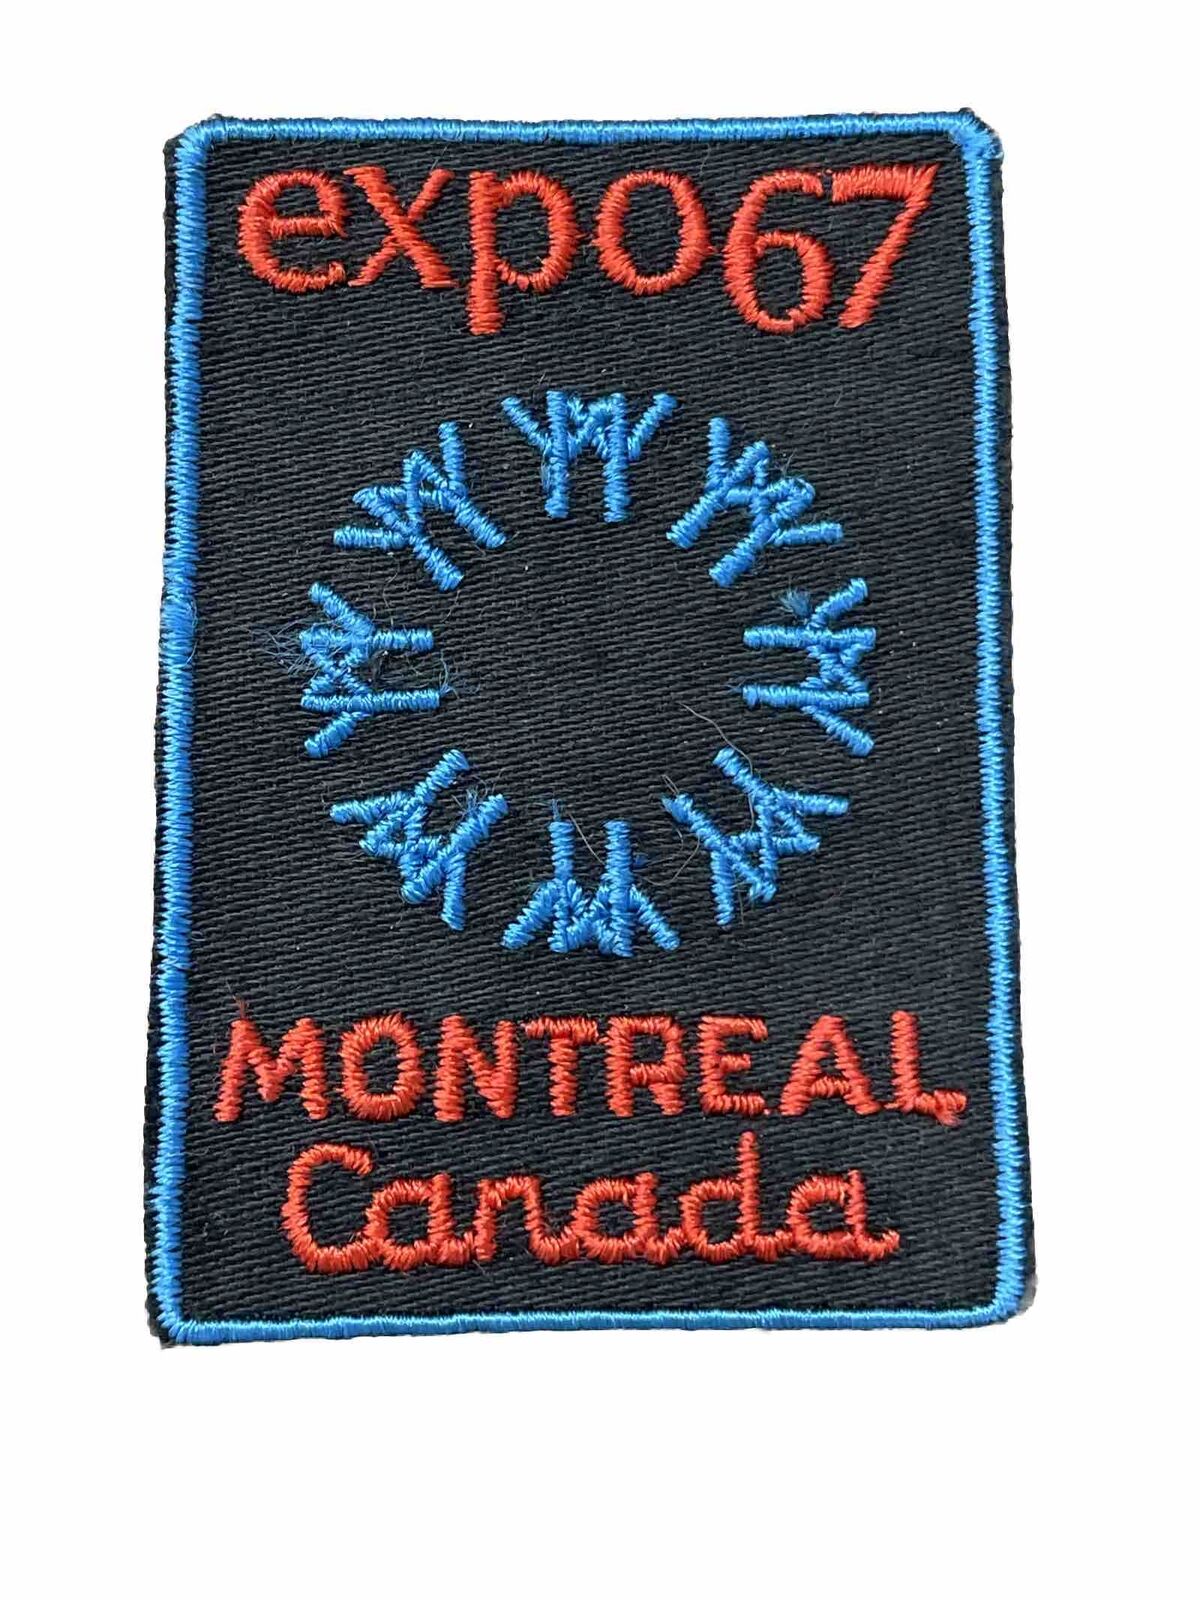 Vintage Expo 67 Montreal Quebec Canada Patch Badge Crest